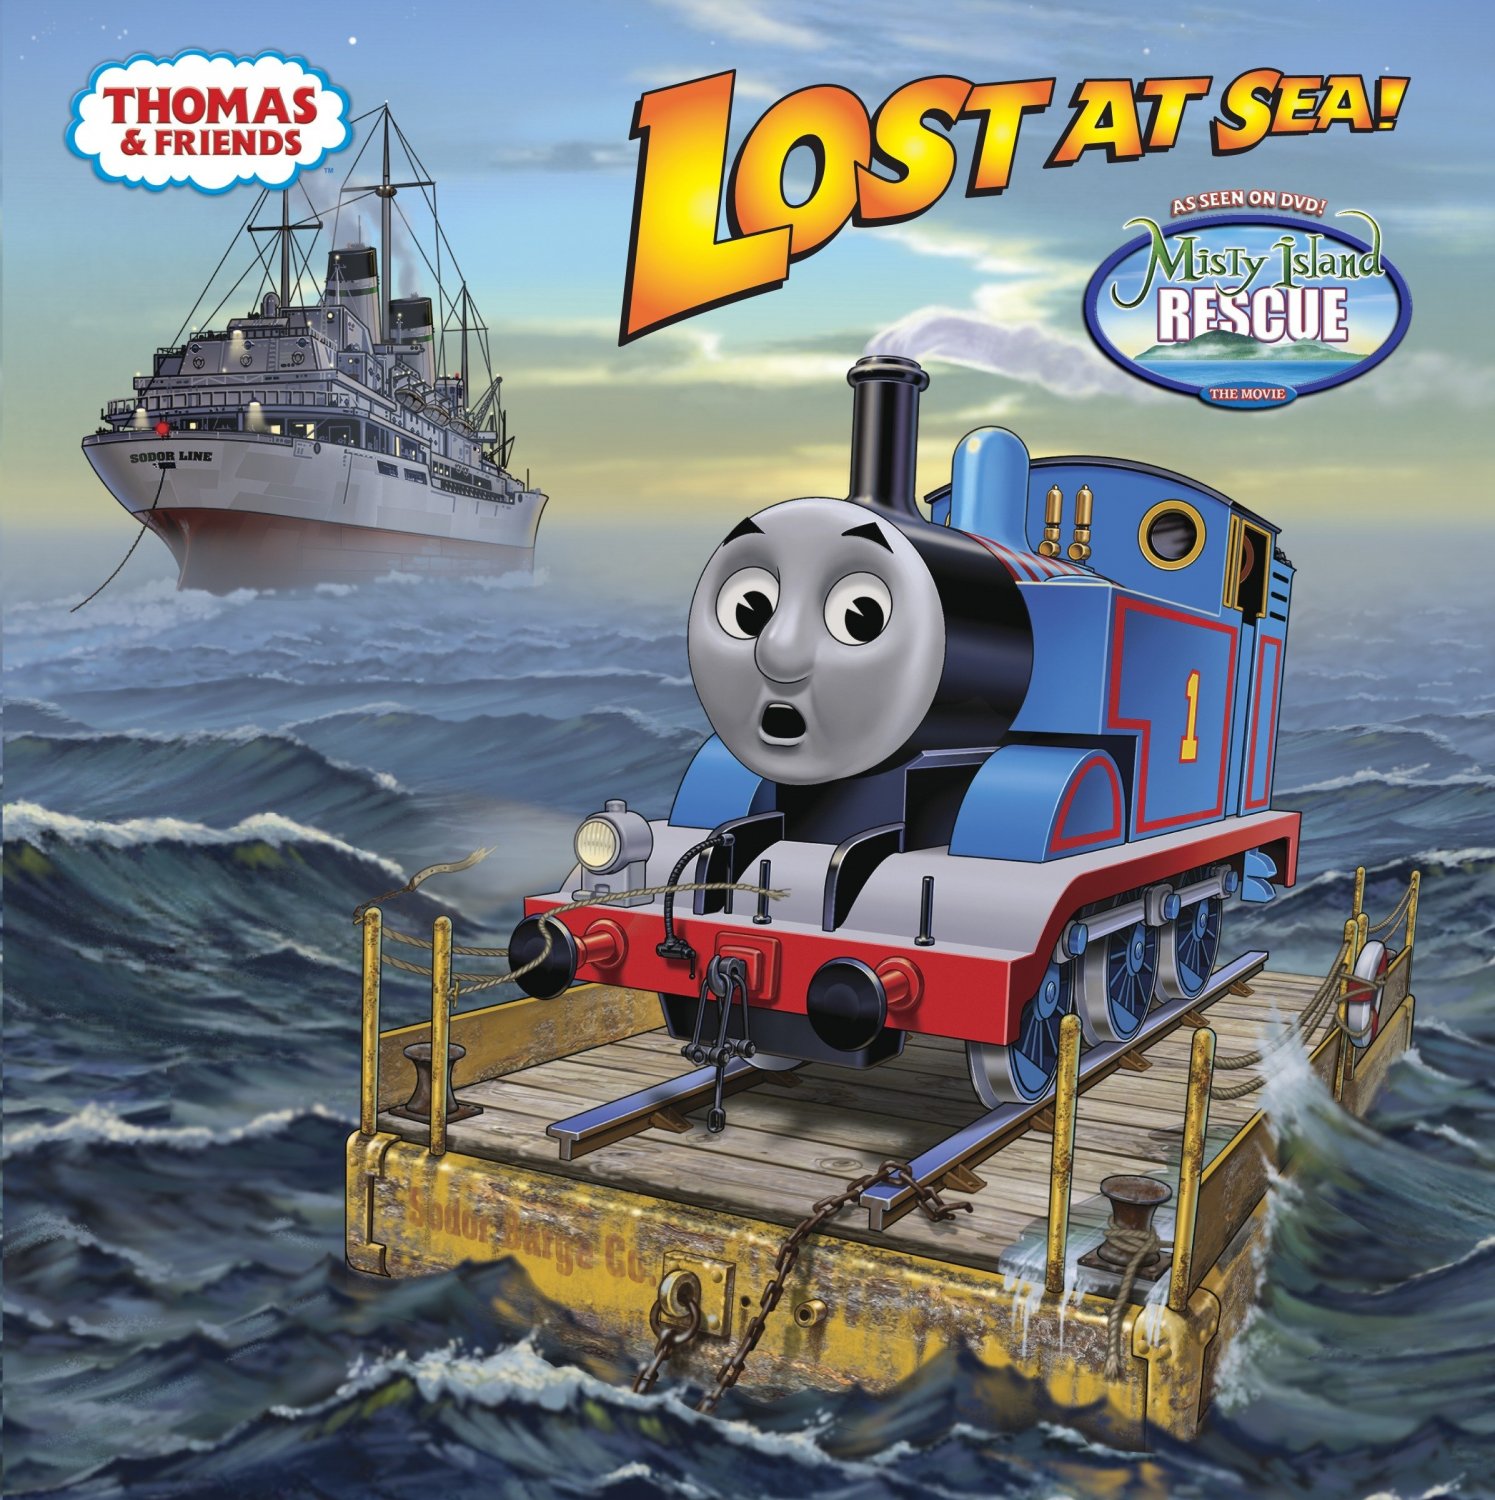 Thomas the Tank Engine: Lost at Sea! Misty Island Rescue(Pictureback)